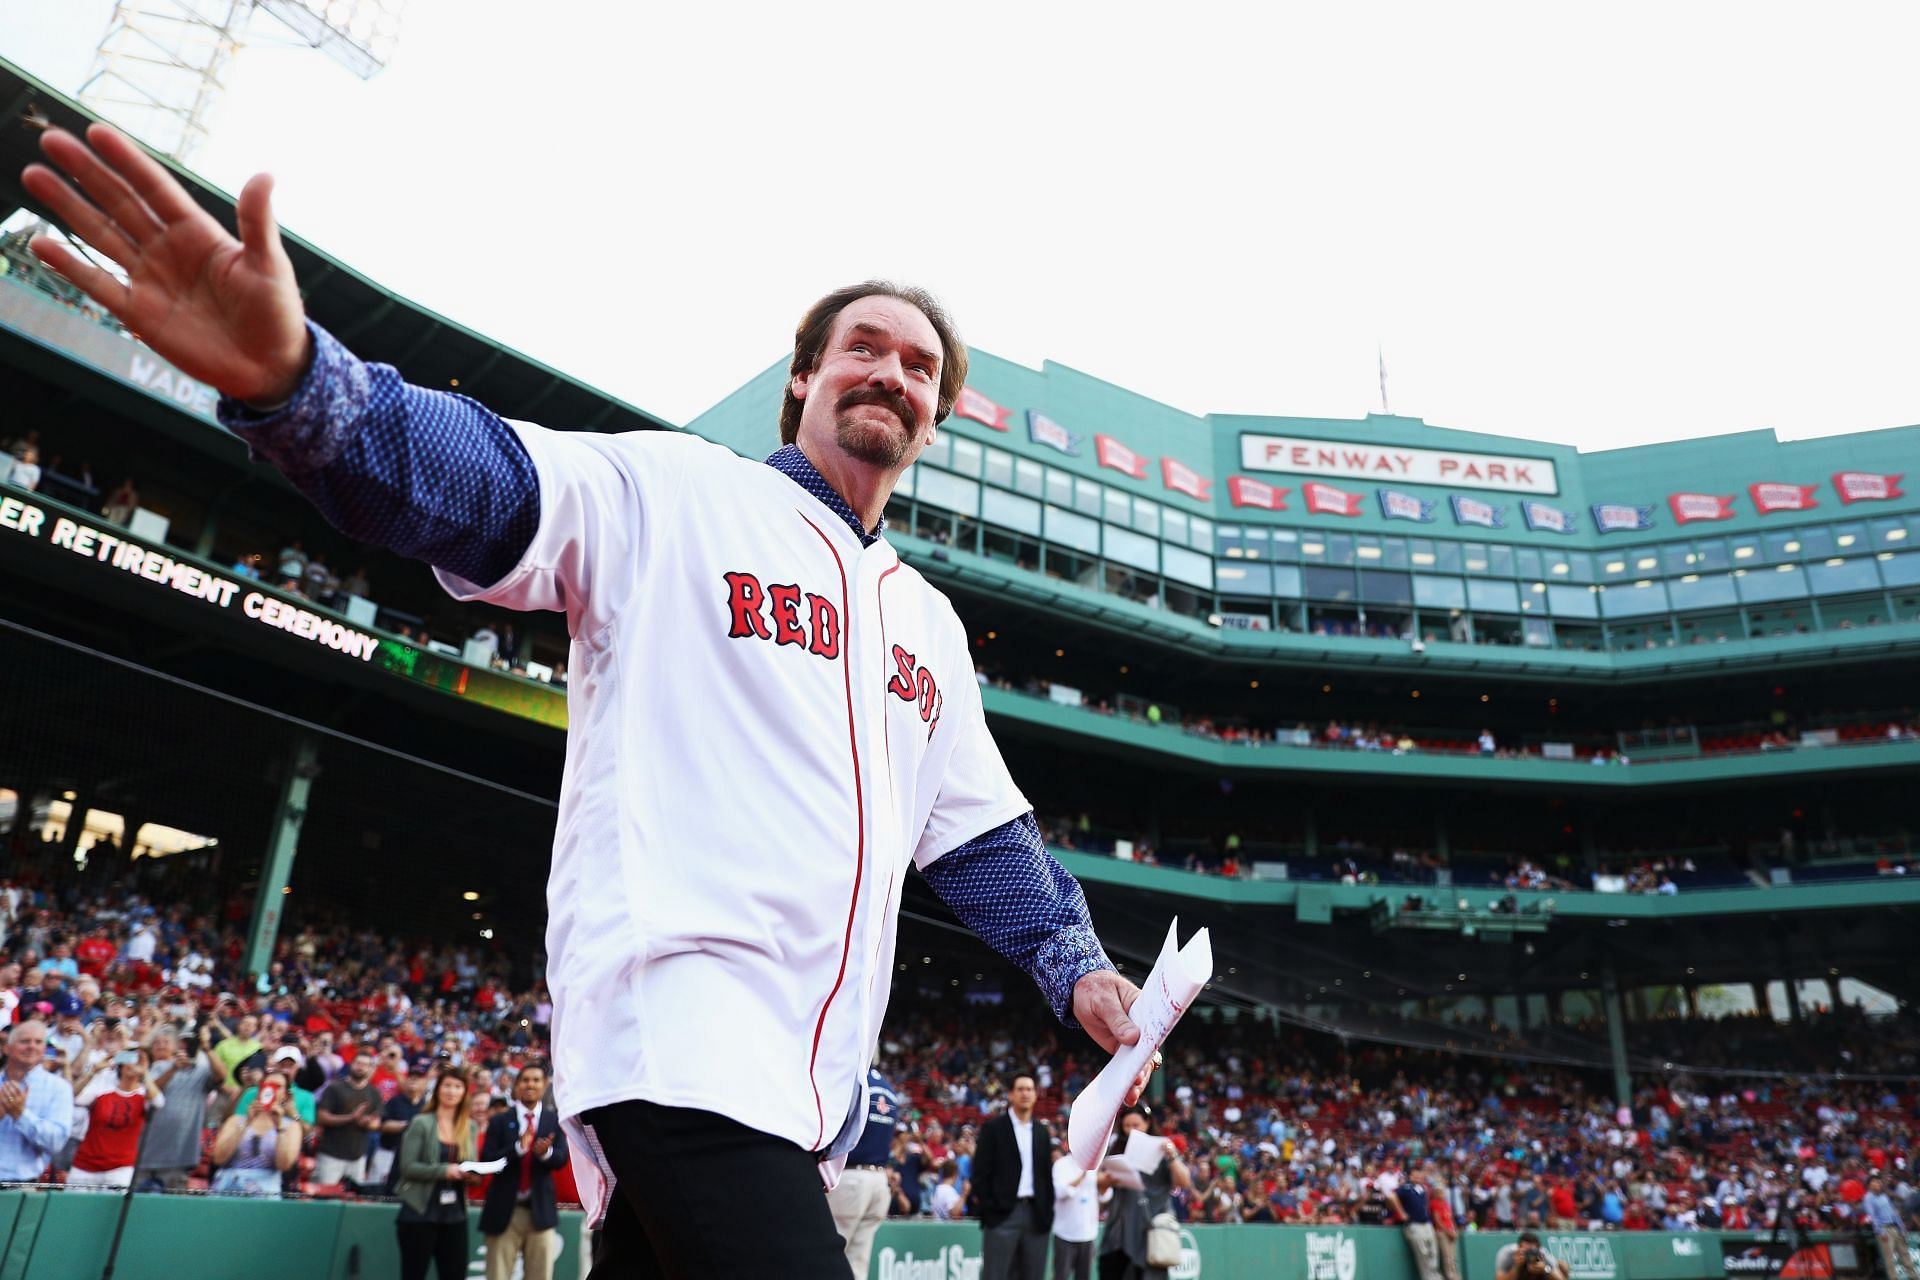 Red Sox retiring Wade Boggs' number 26